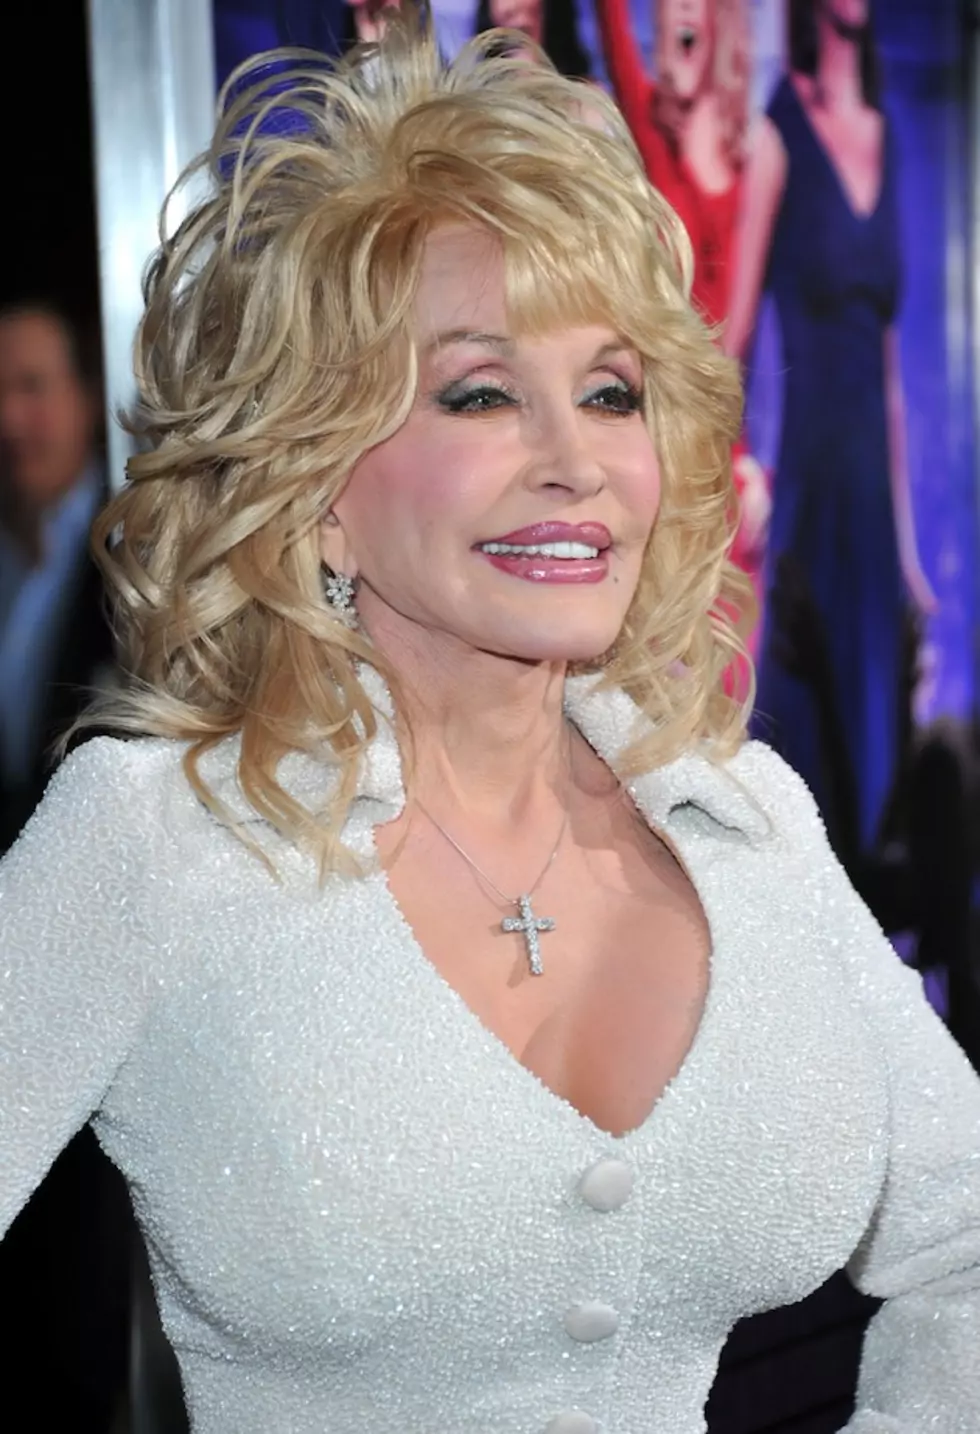 Does Dolly Parton Age Backwards? — Morning Eyegasm [PICTURES]